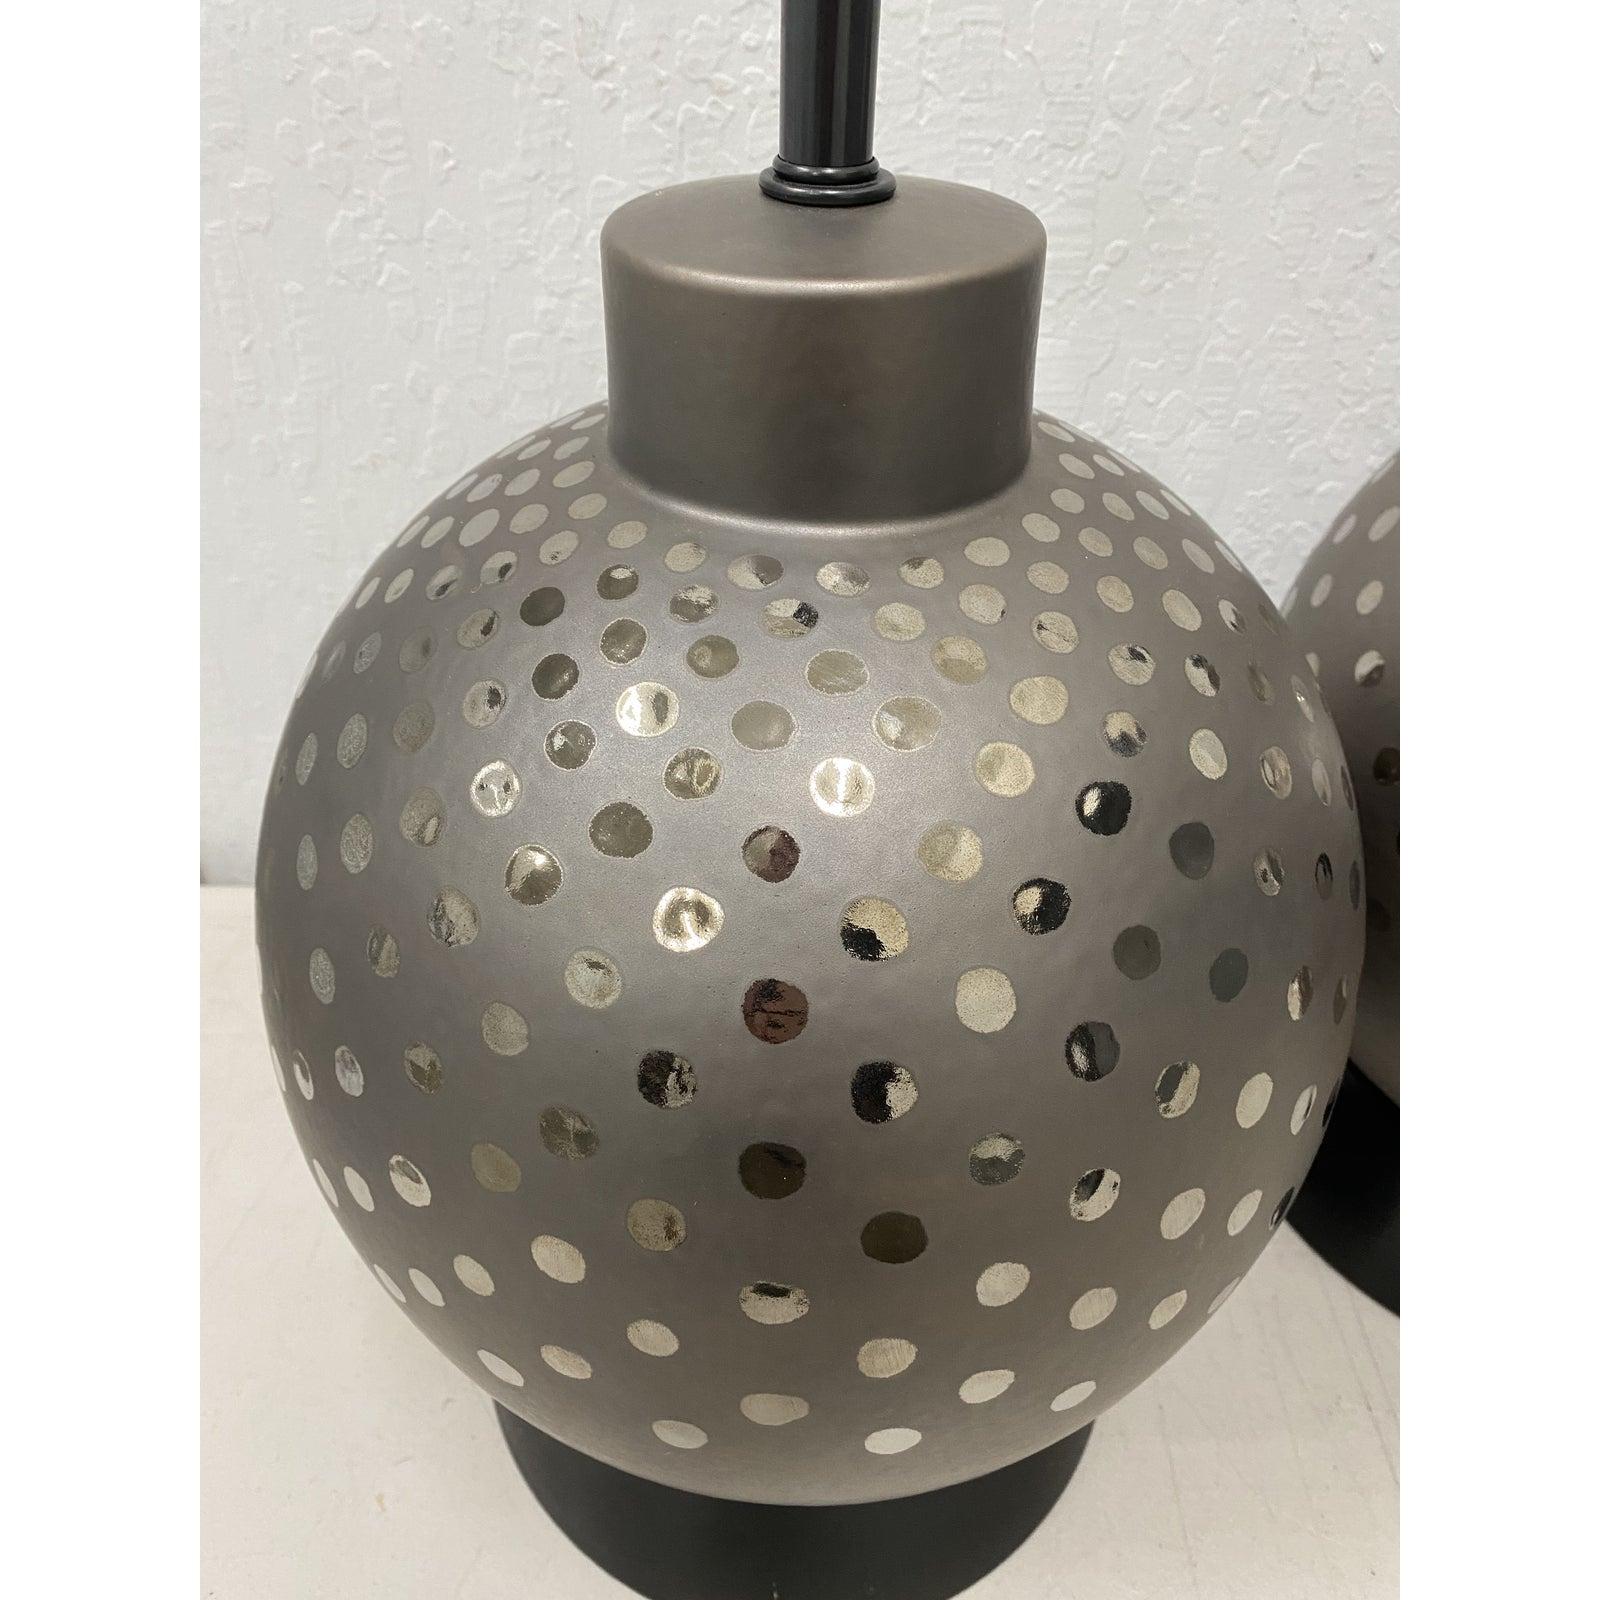 Pair of vintage ceramic metallic silver glaze ball lamps by Marbro circa 1970

Gorgeous lamps with metallic silver spots. The black shades are included in 